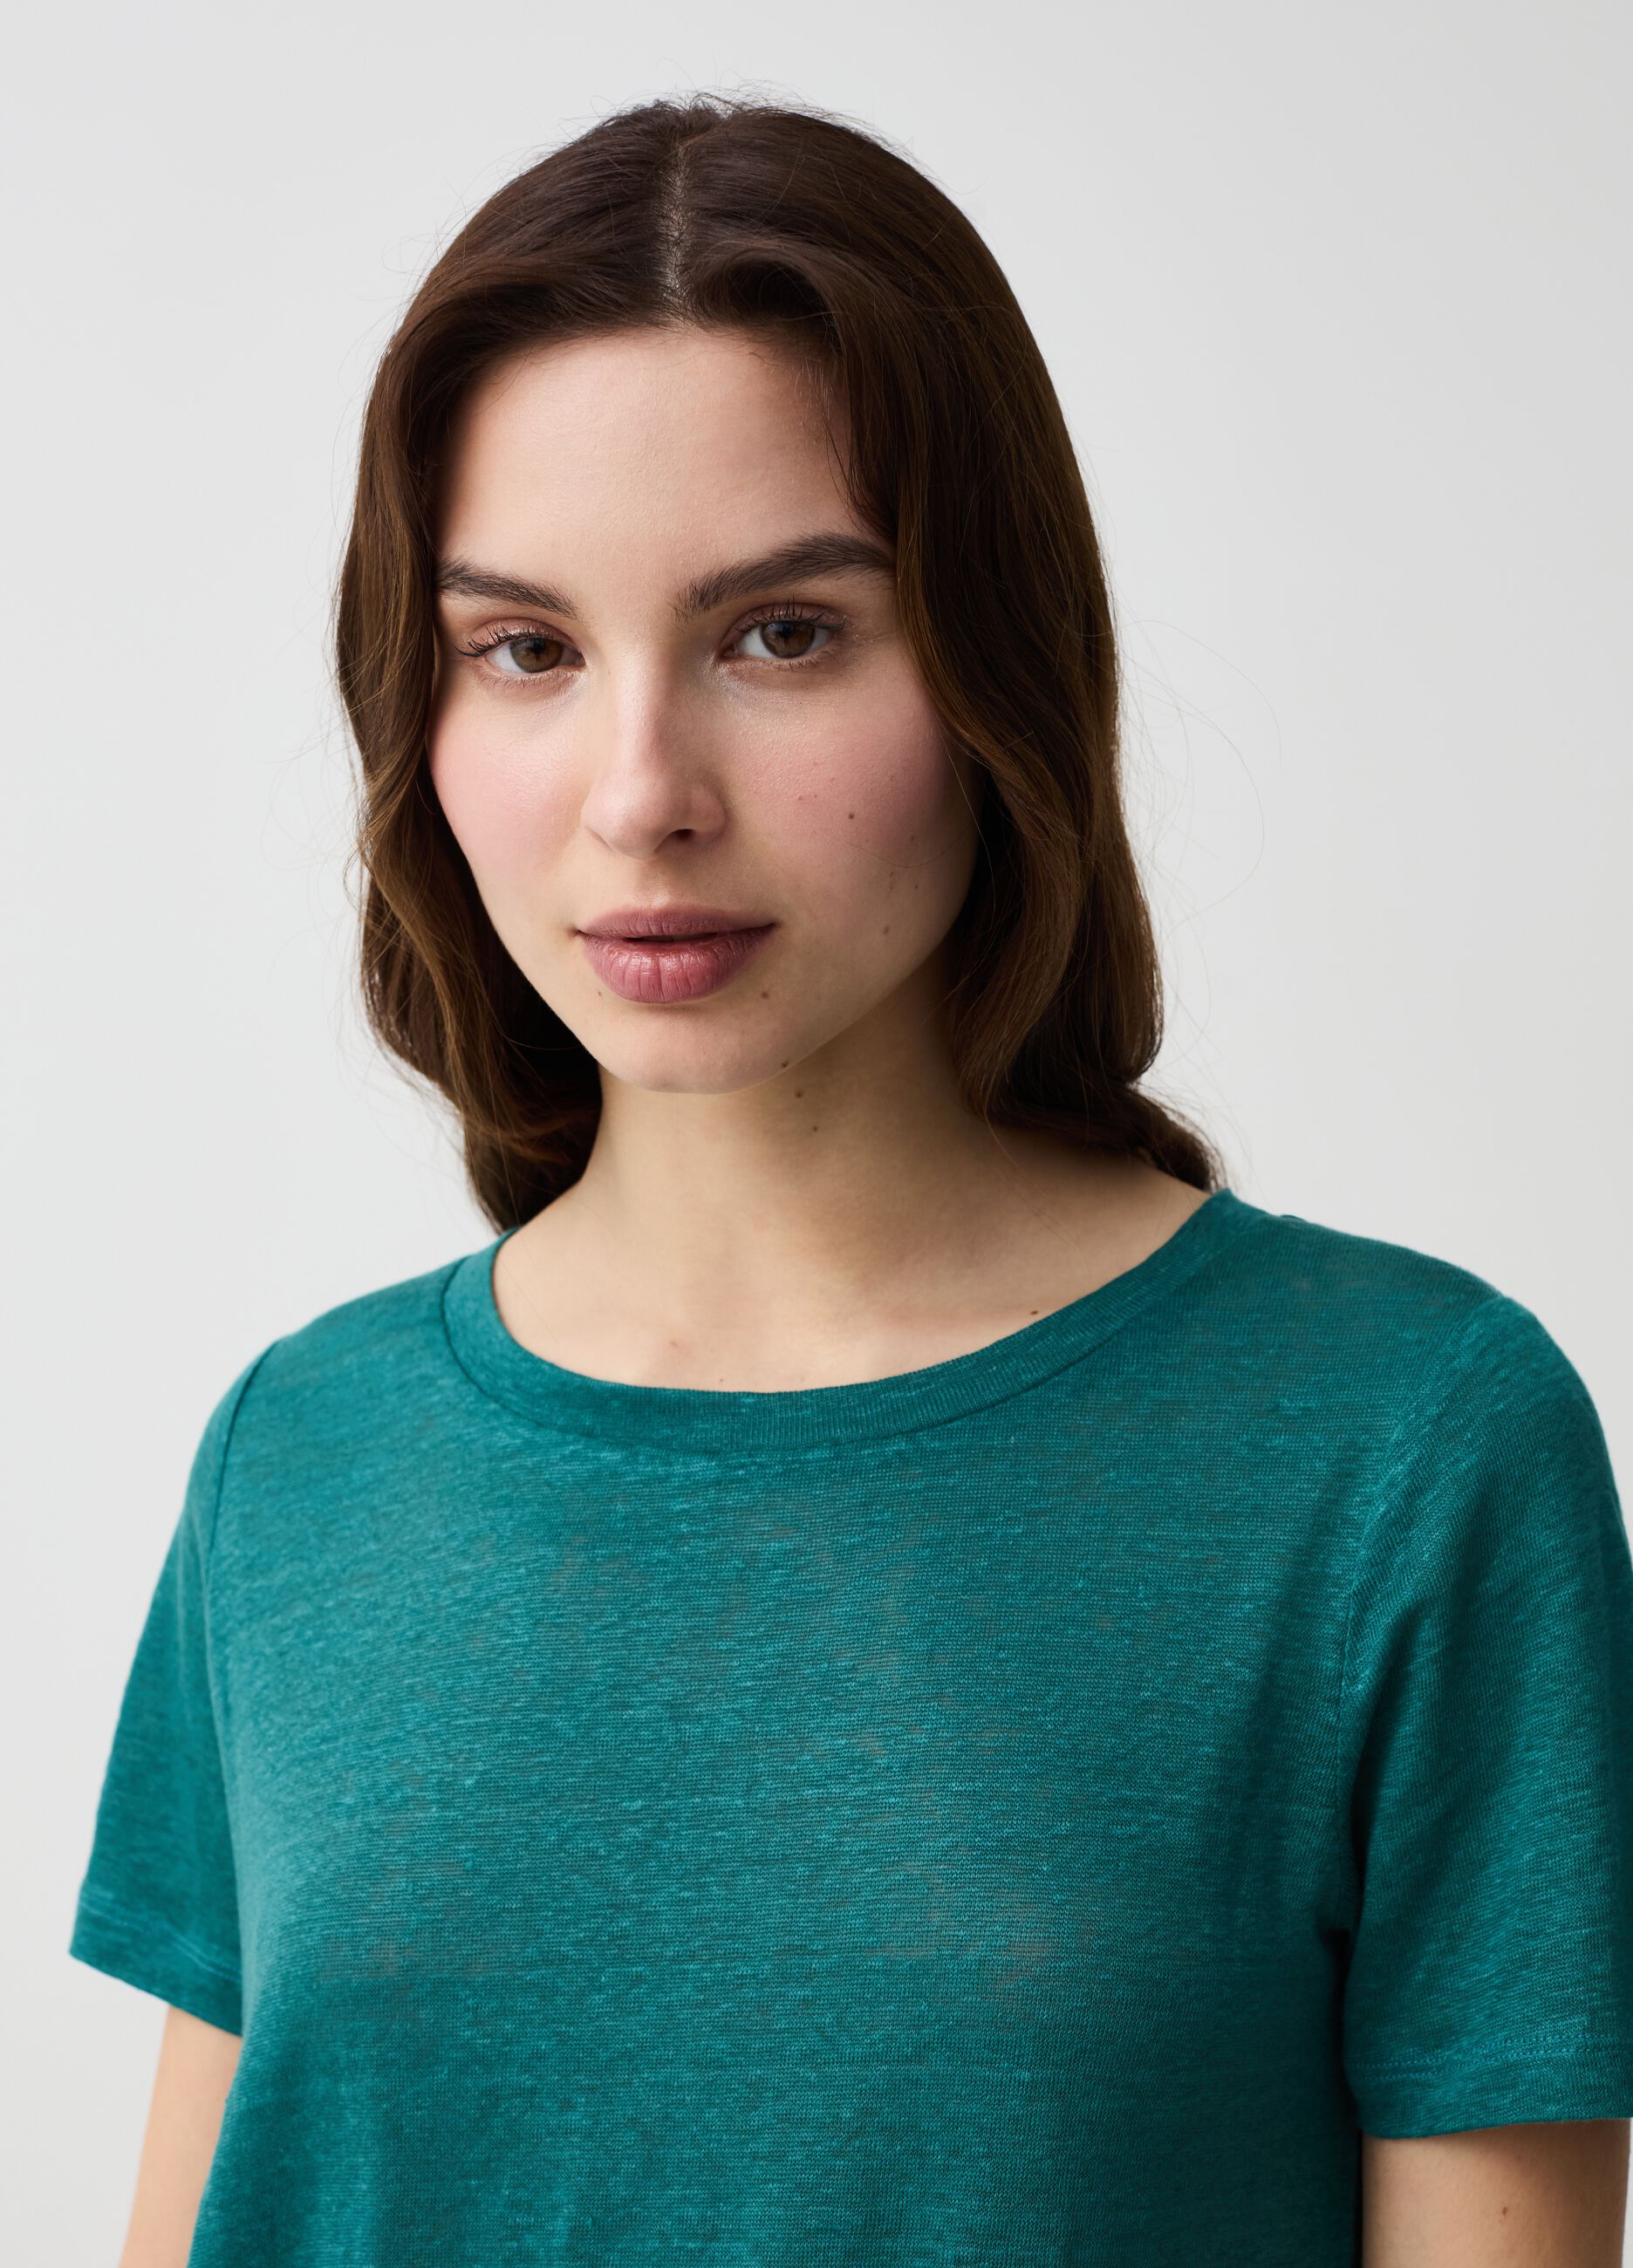 Linen T-shirt with round neck